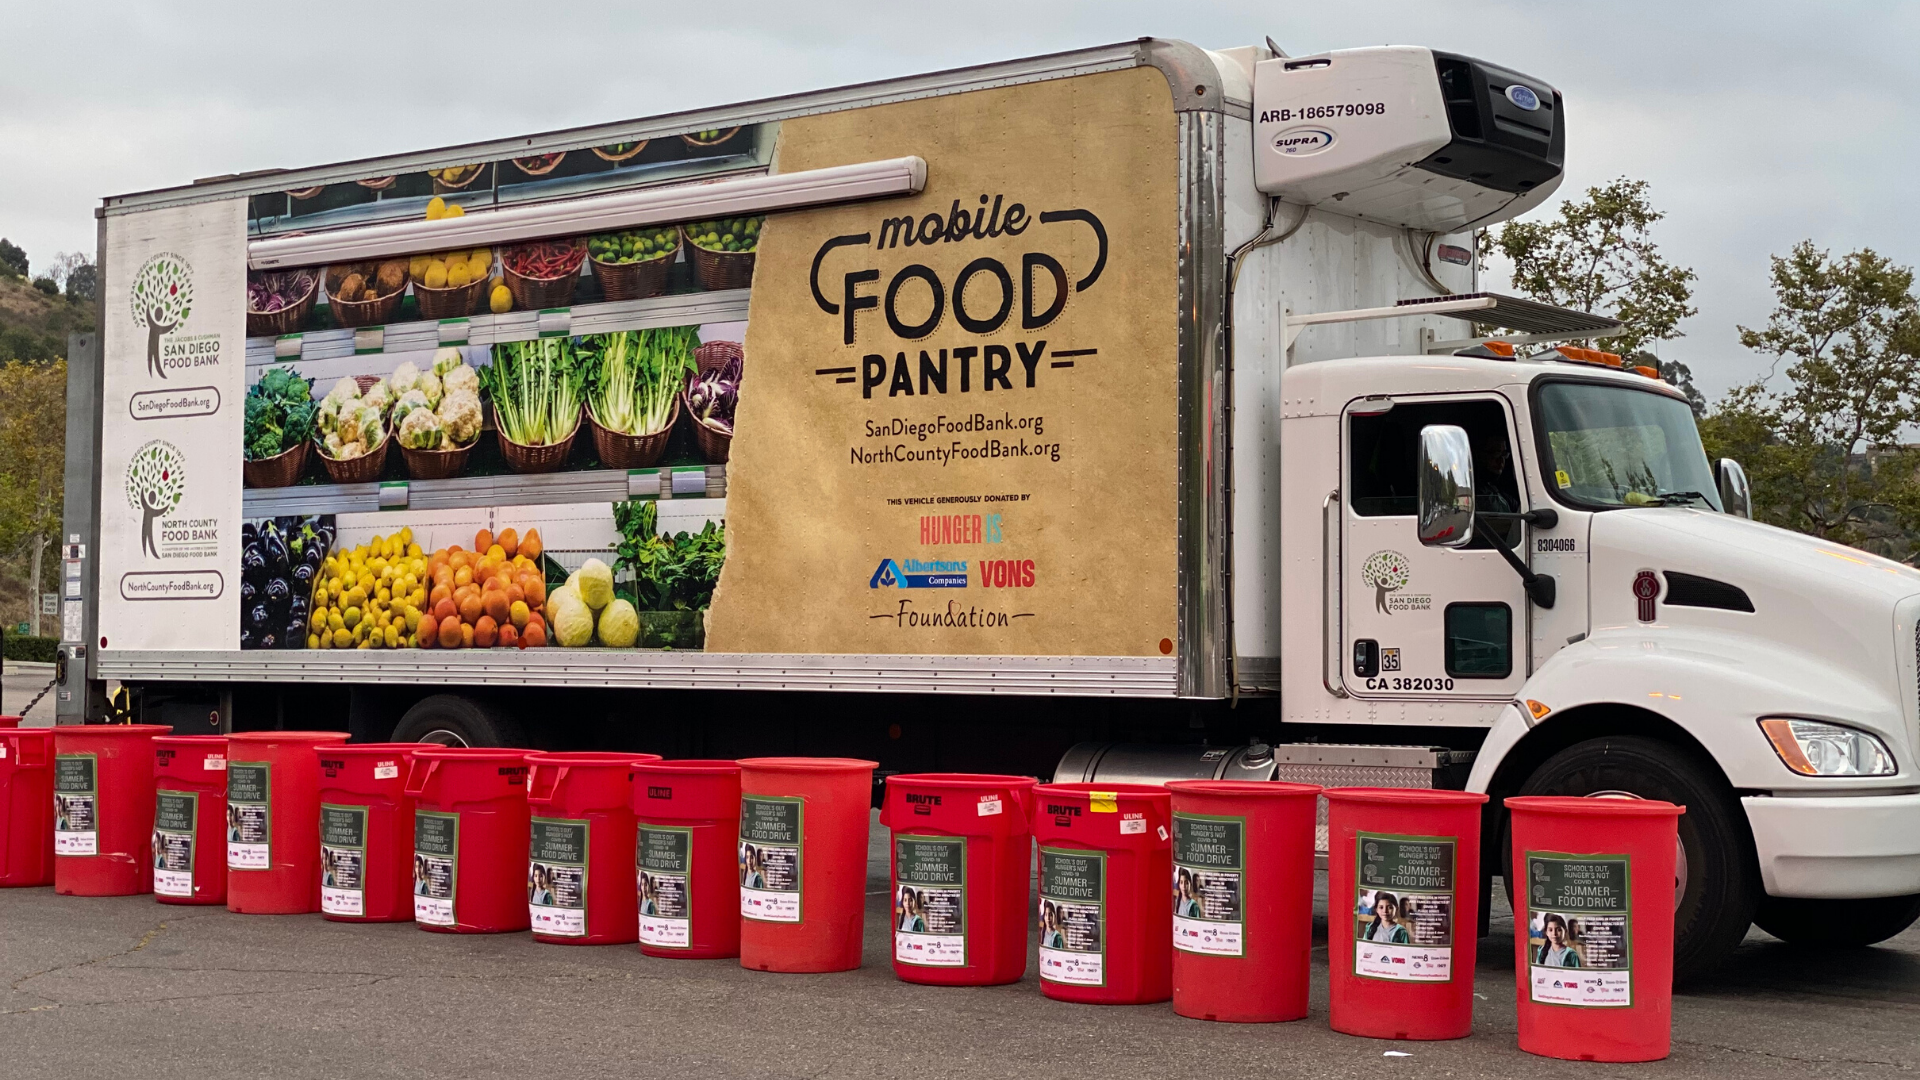 SDG&E Joins Forces with San Diego Food Bank to Help Feed Families